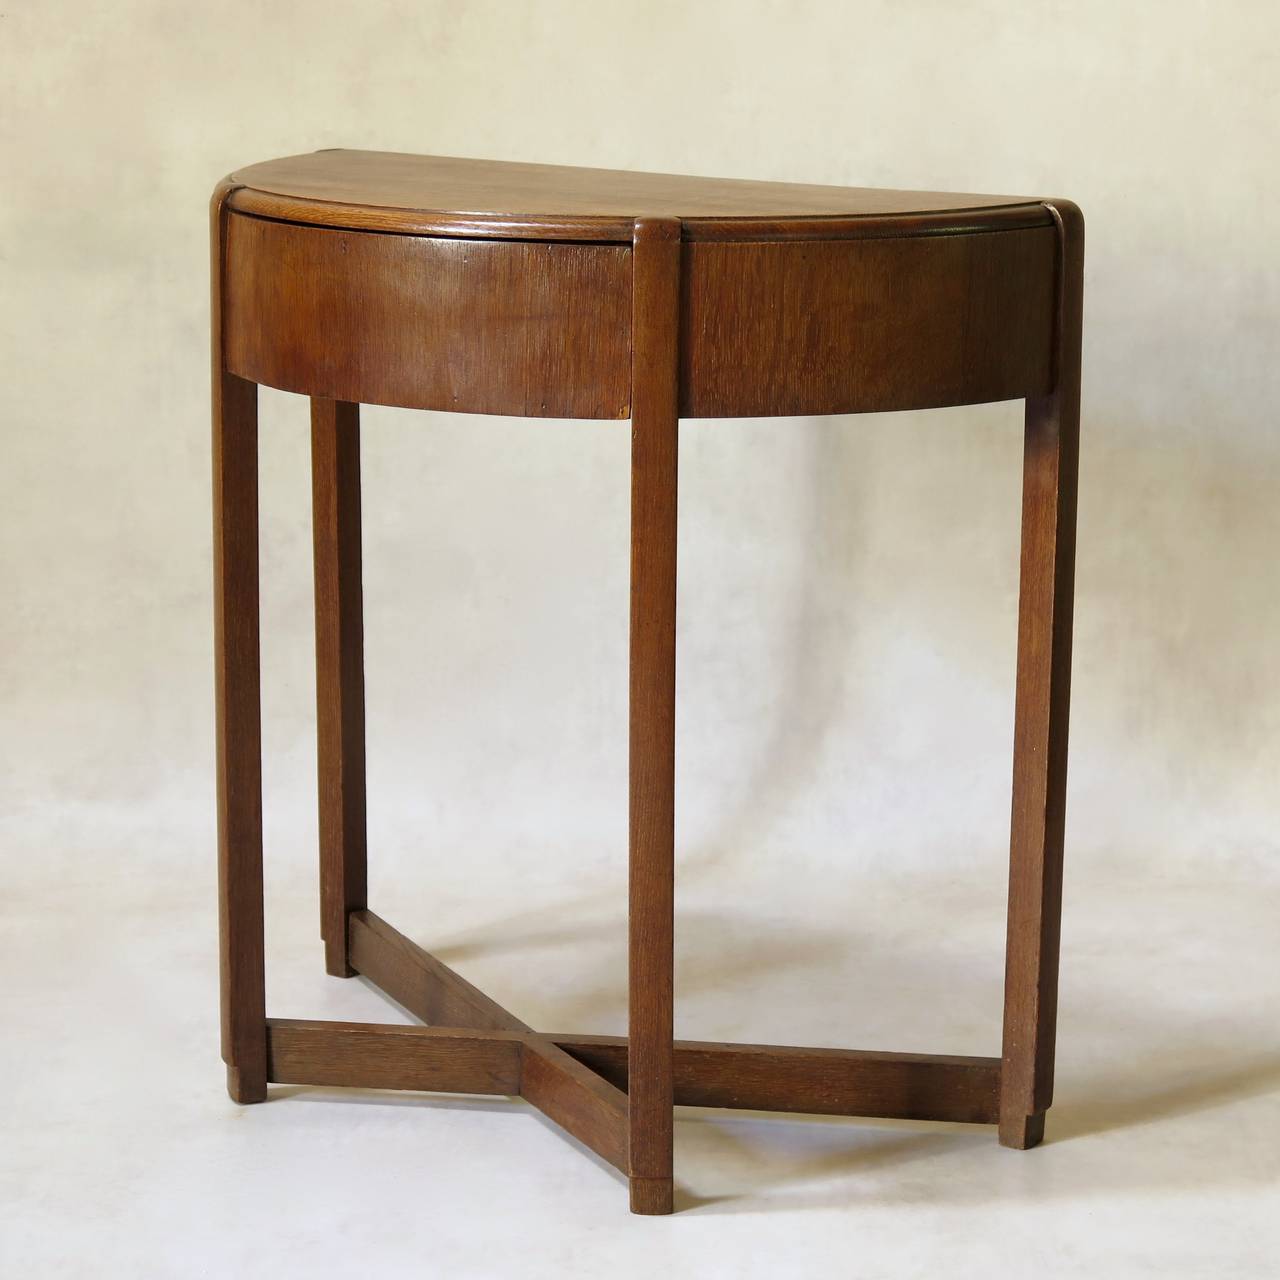 Chic 1940s demi-lune console of appealing, minimalist design. The legs, in solid oak, are joined by an X-shape stretcher. The apron is faced in oak veneer, and has a central drawer.